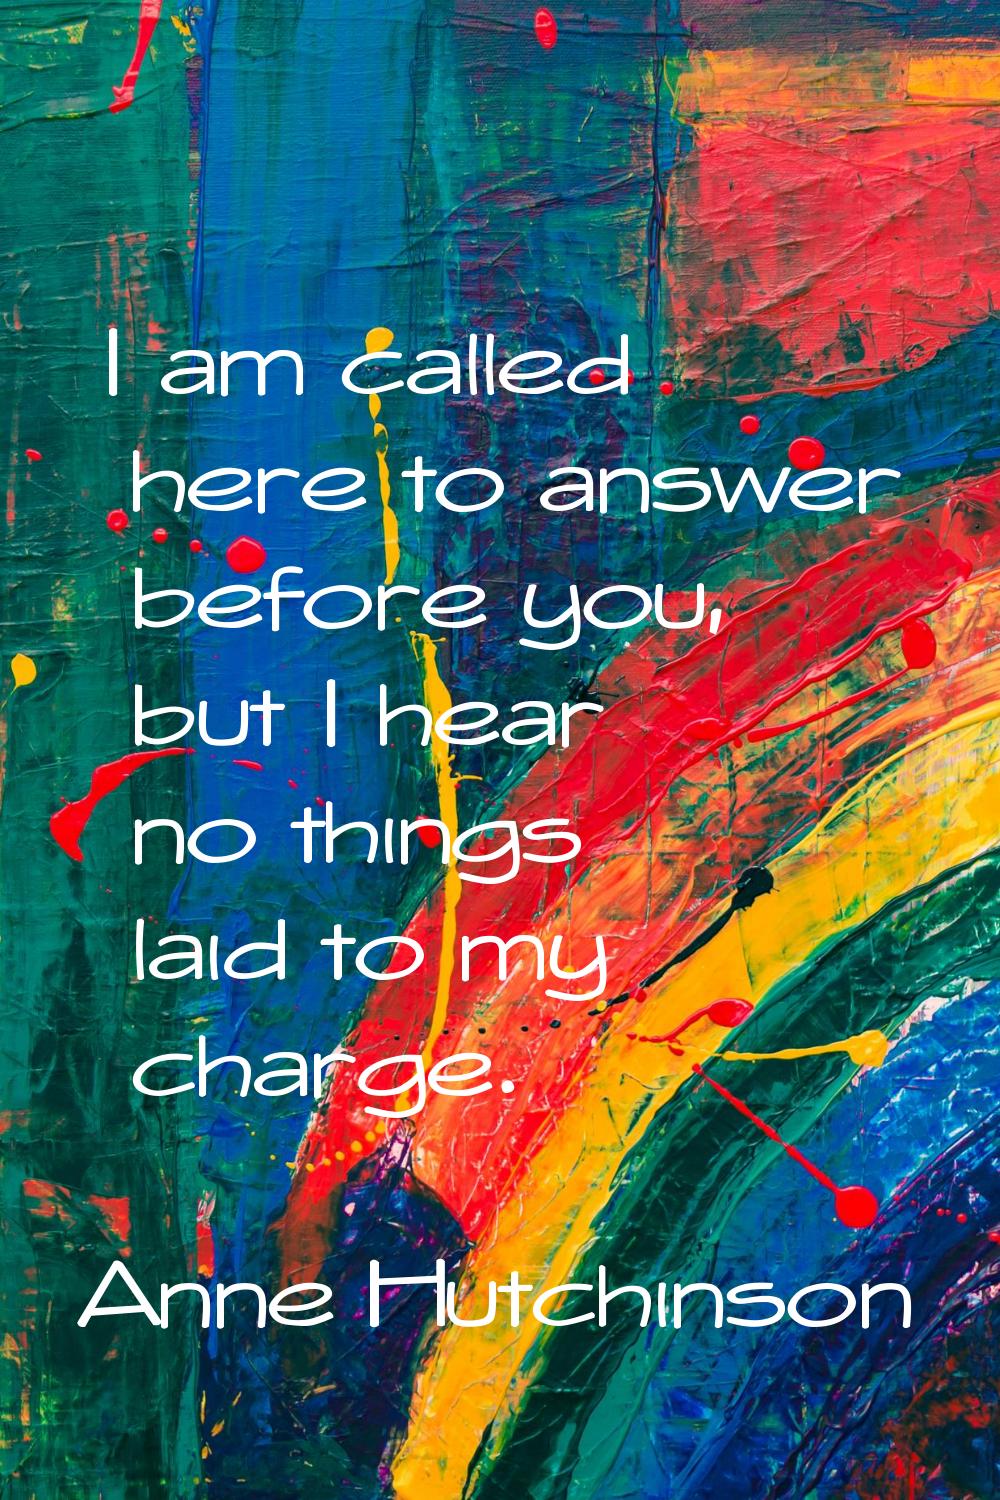 I am called here to answer before you, but I hear no things laid to my charge.